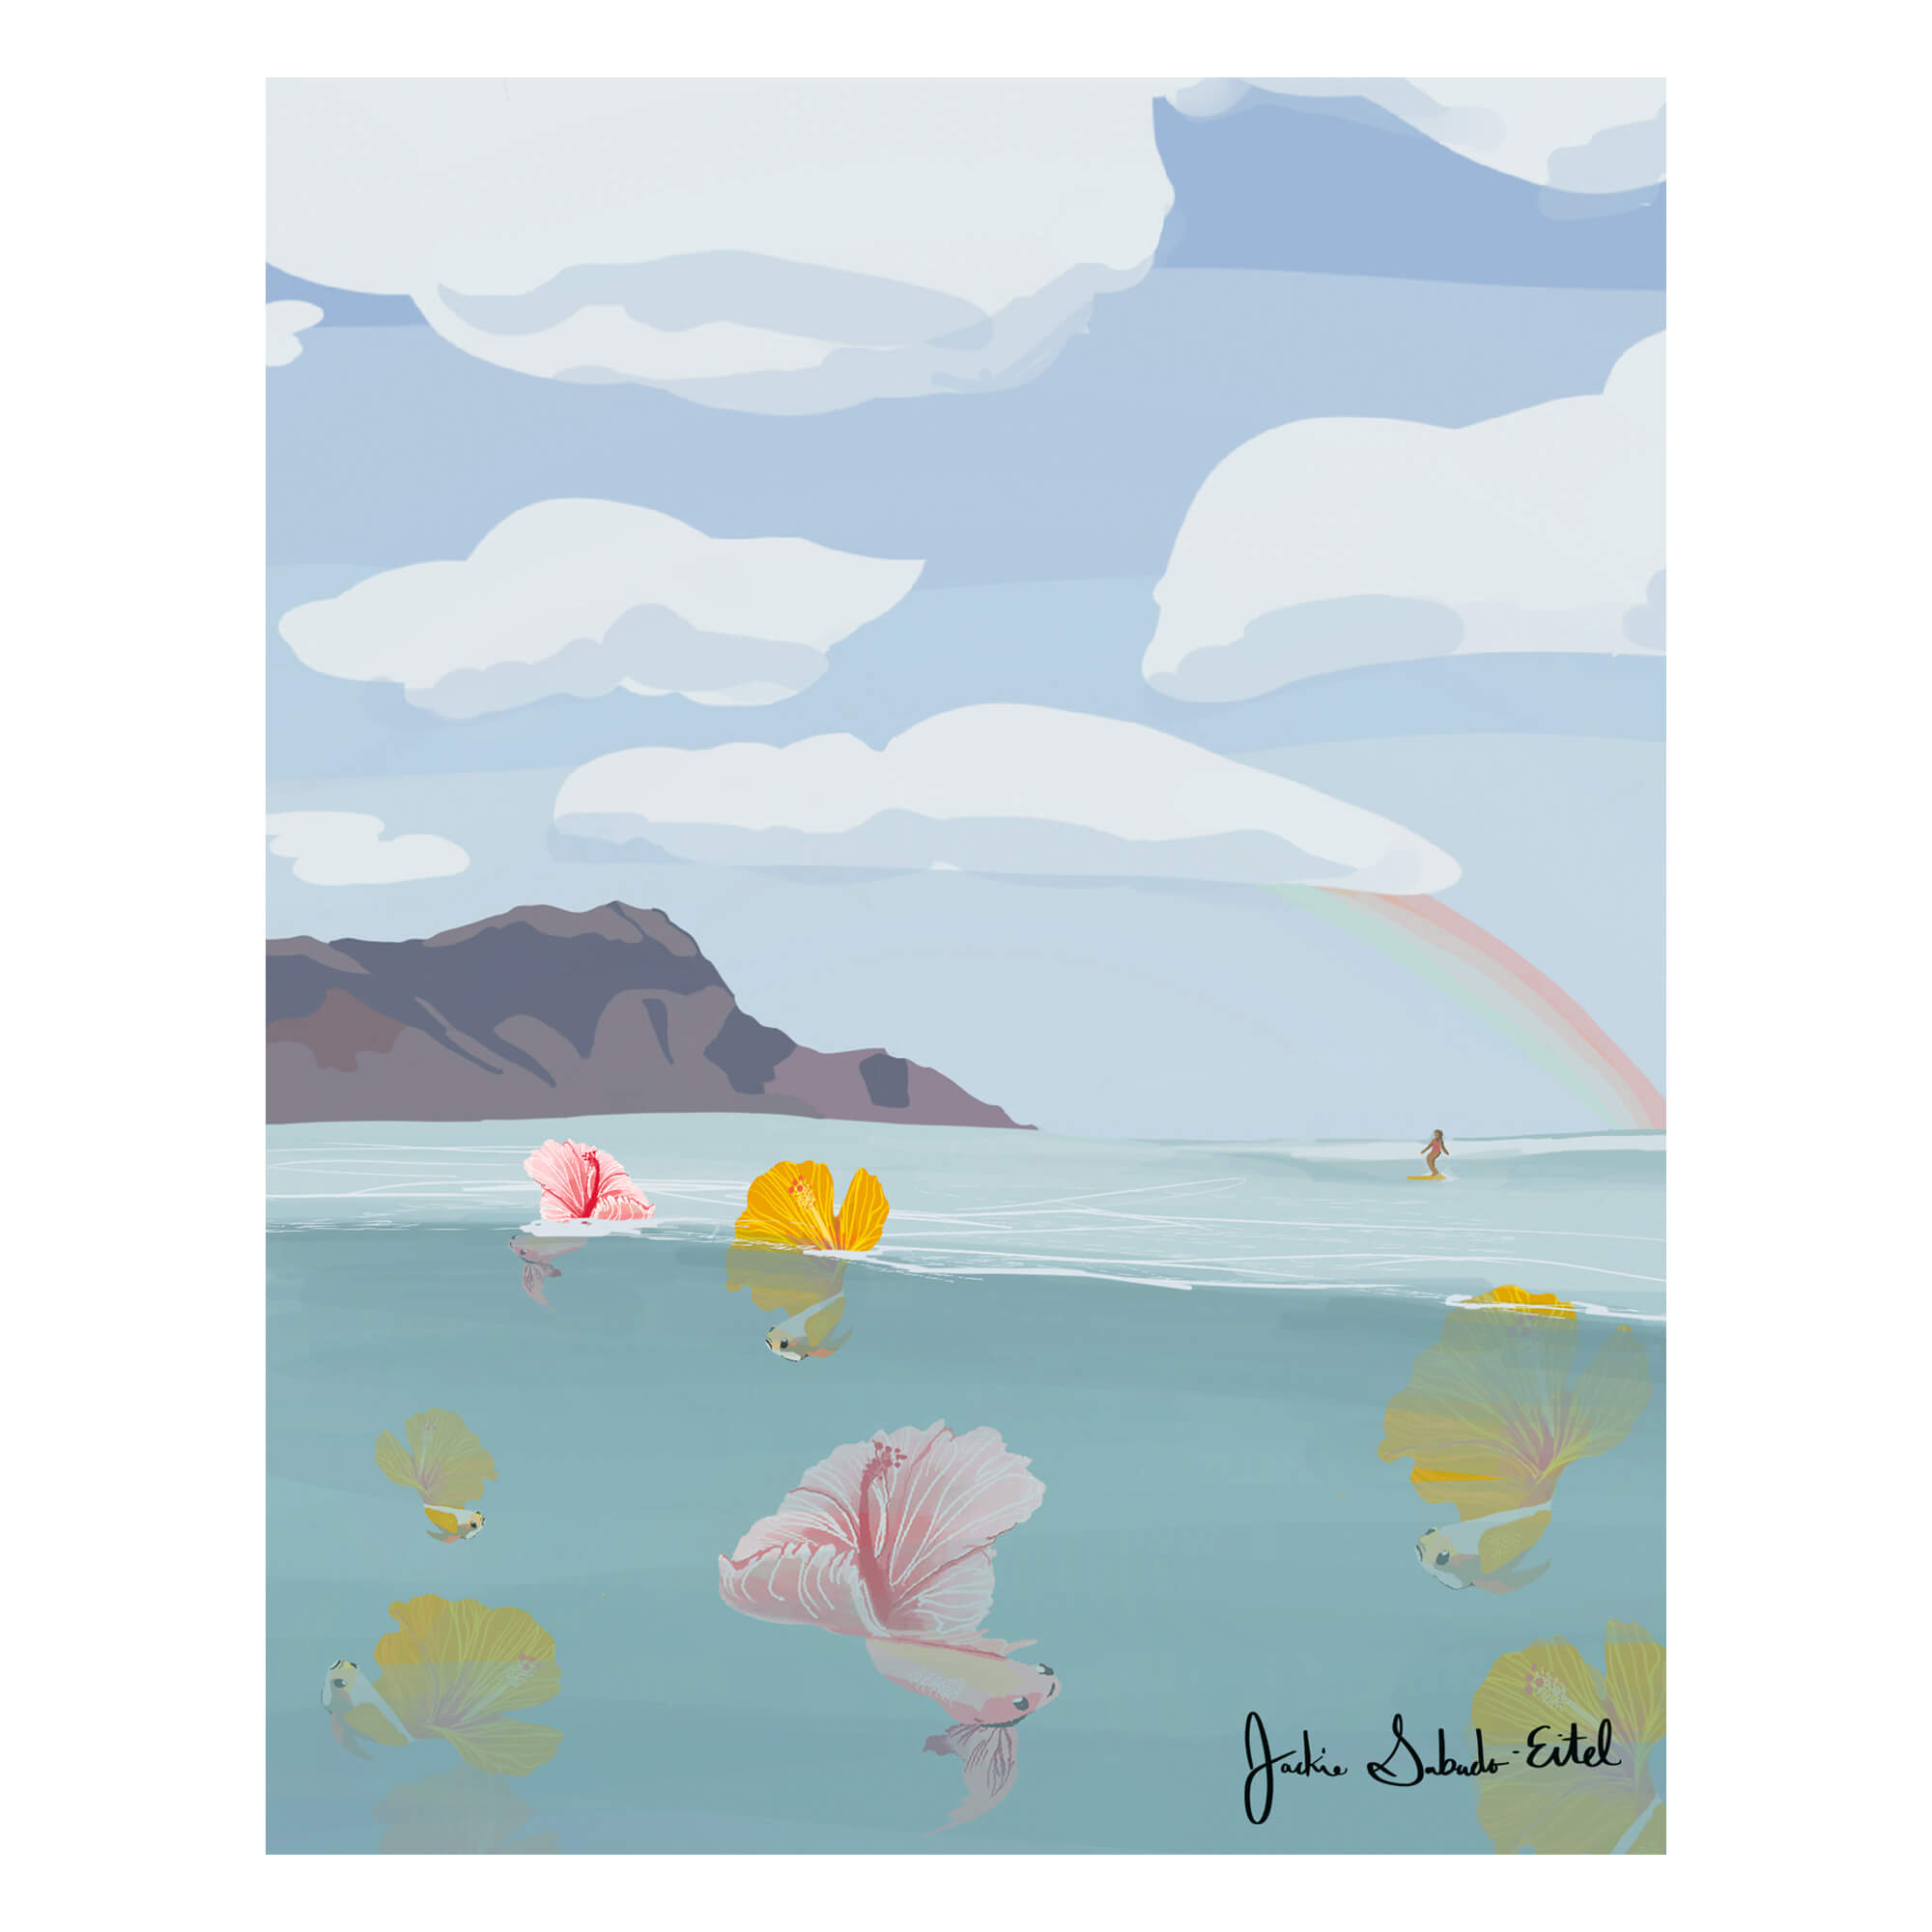 A canvas giclée print featuring colorful tropical fish with hibiscus flowers as their tails, the Diamond Head in the background with a woman surfing by Hawaii artist Jackie Eitel